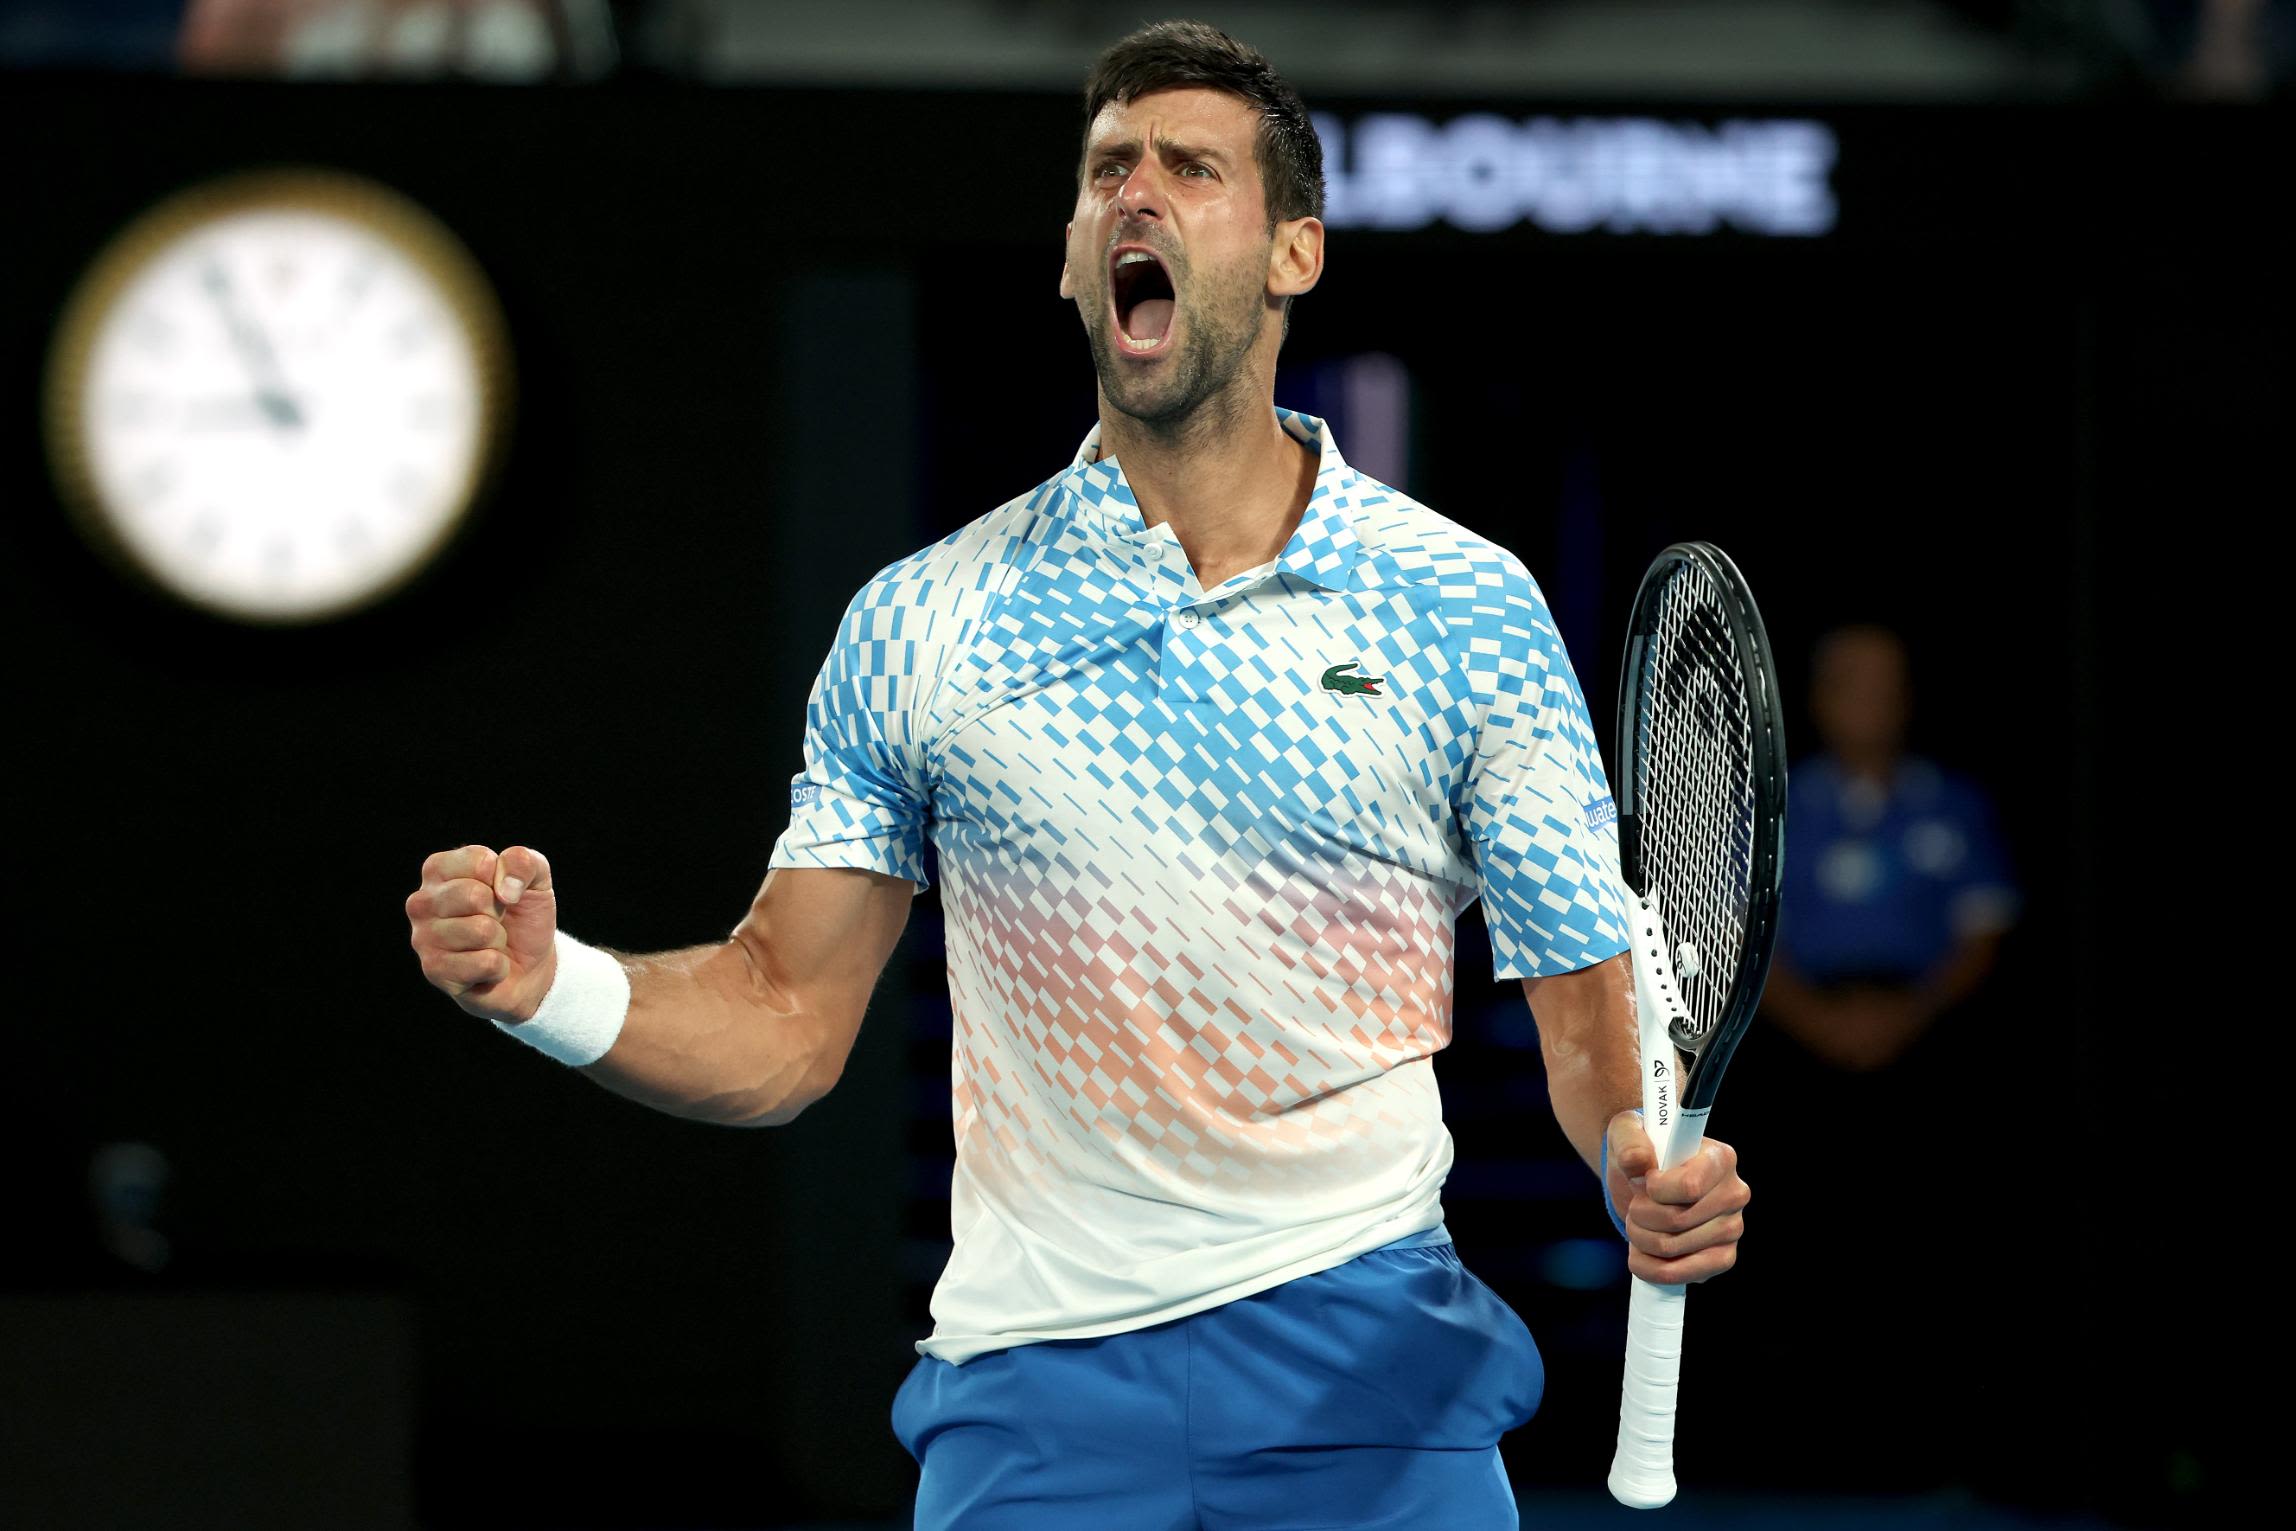 Novak Djokovic reaches Australian Open semifinals with crushing straight sets win over Andrey Rublev